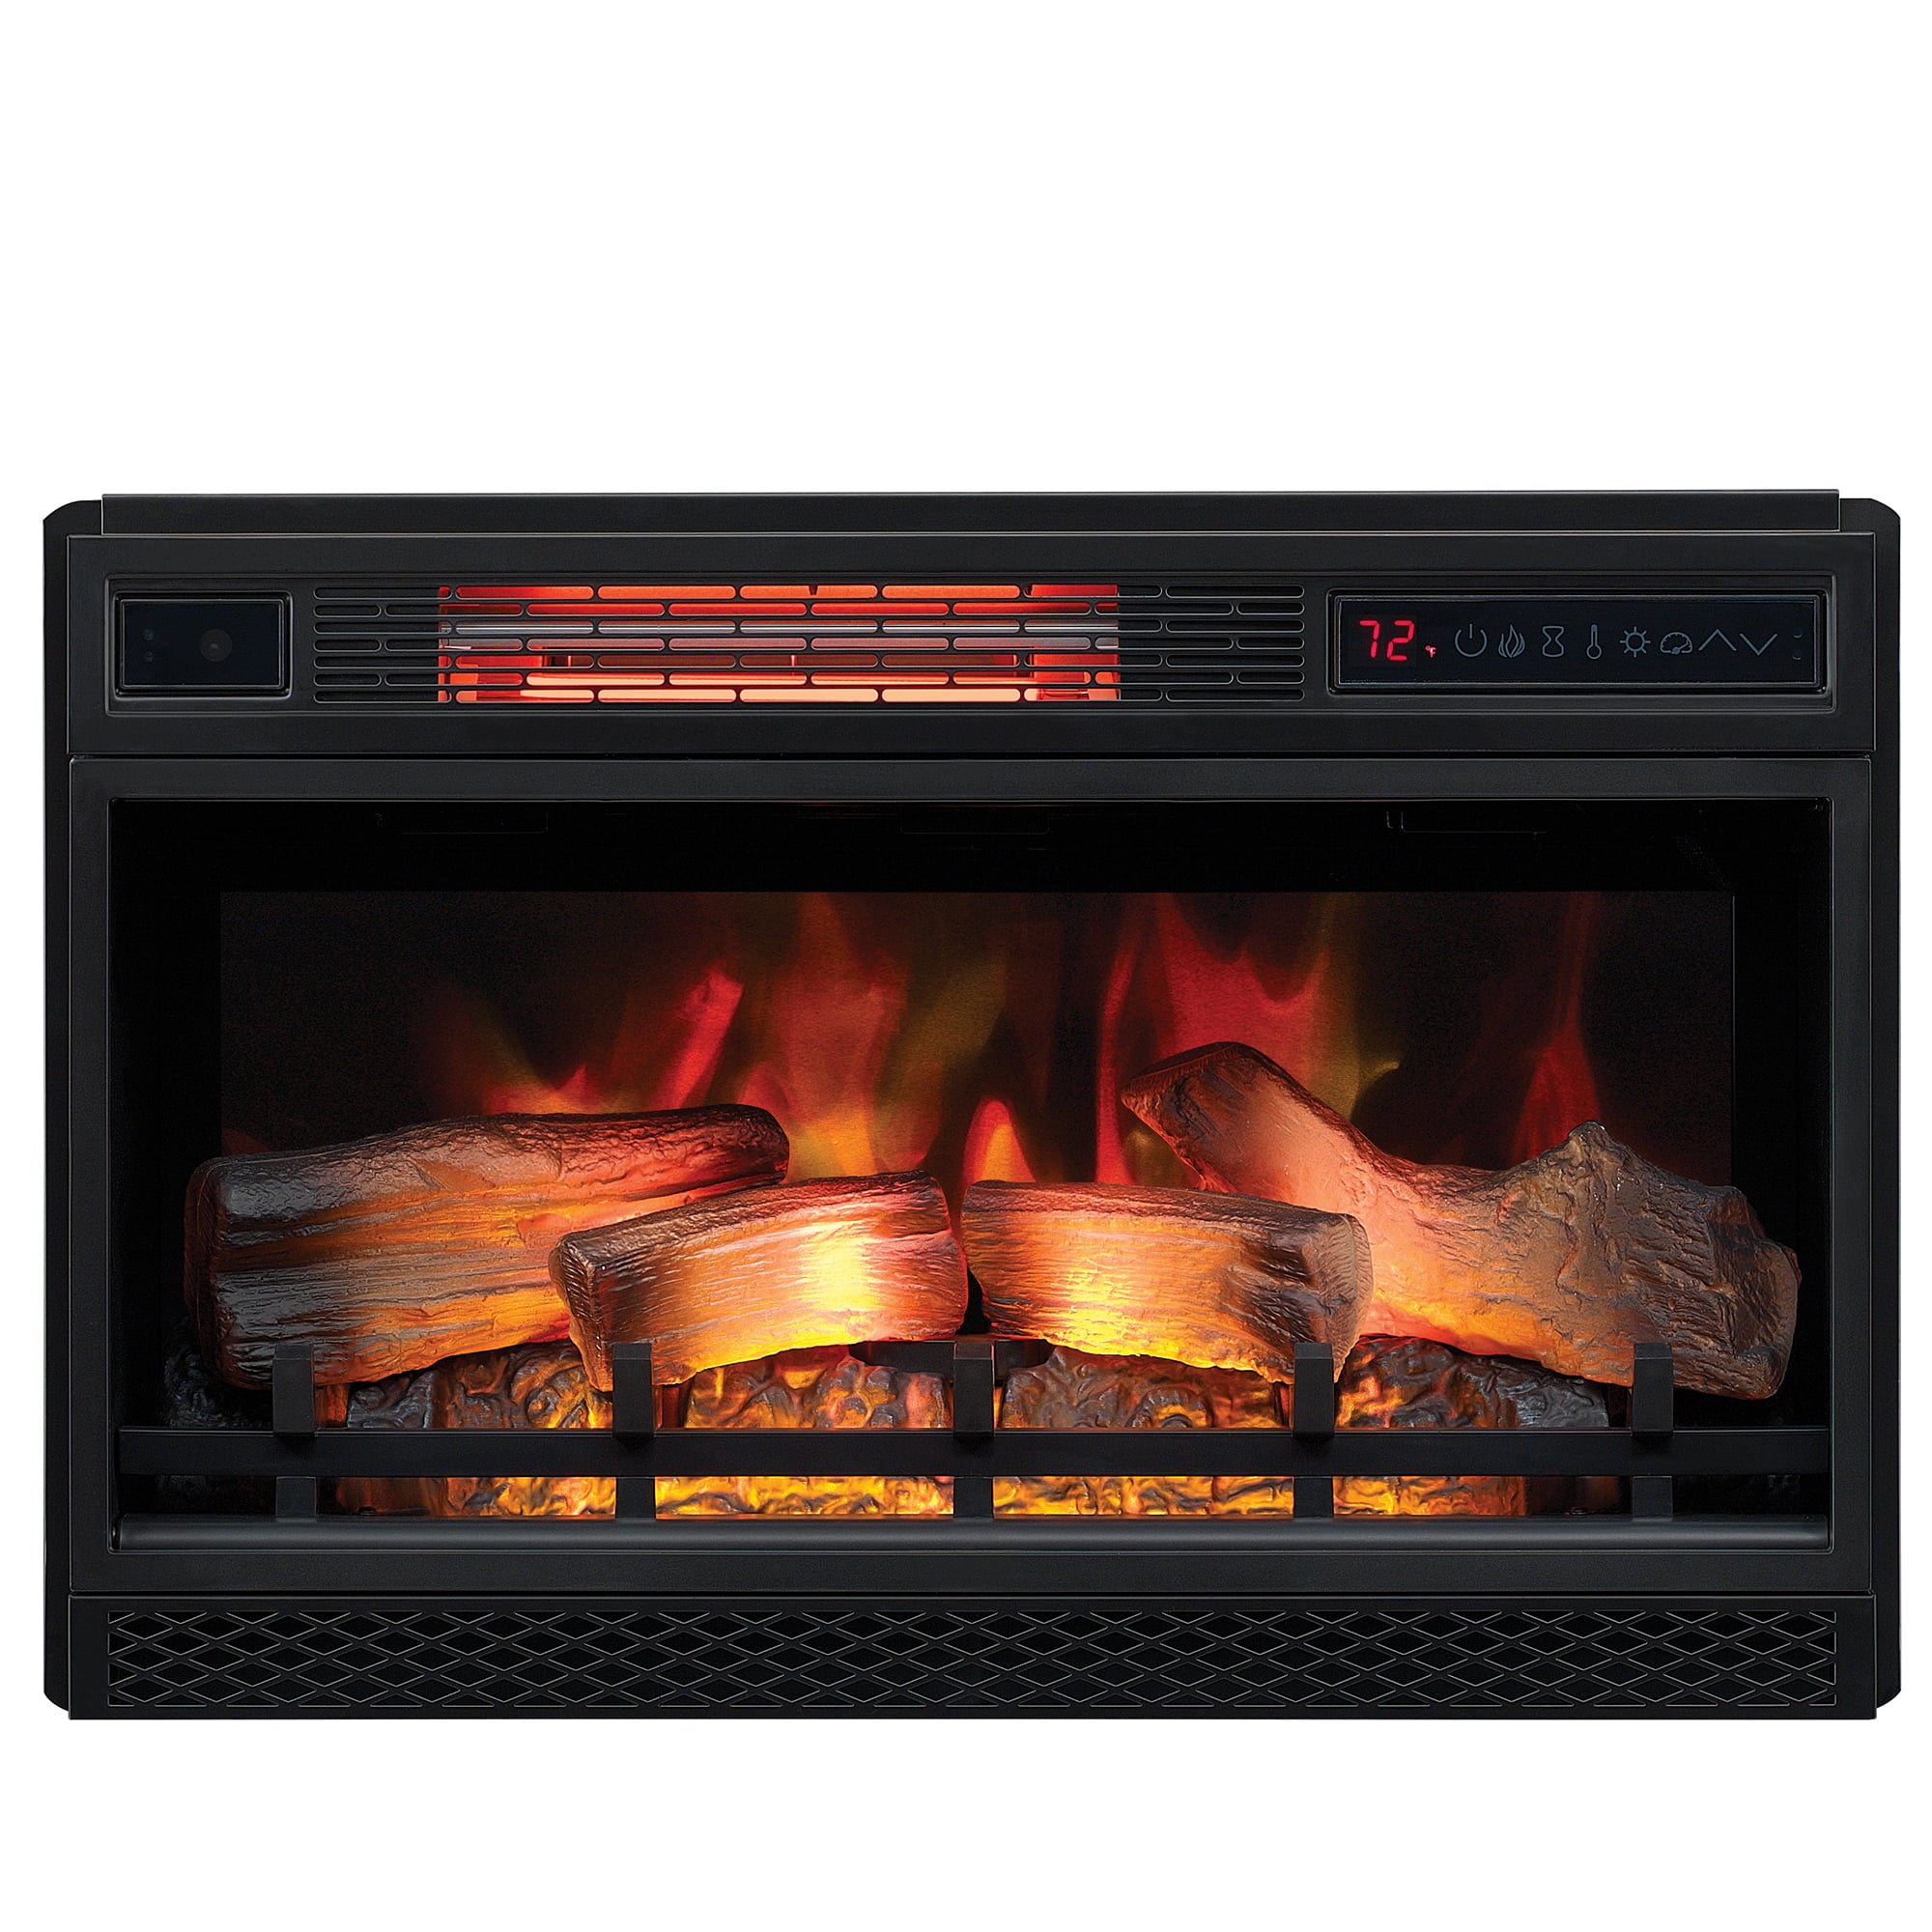 Black Corner Electric Fireplace New Electric Fireplace Classic Flame Insert 26" Led 3d Infrared